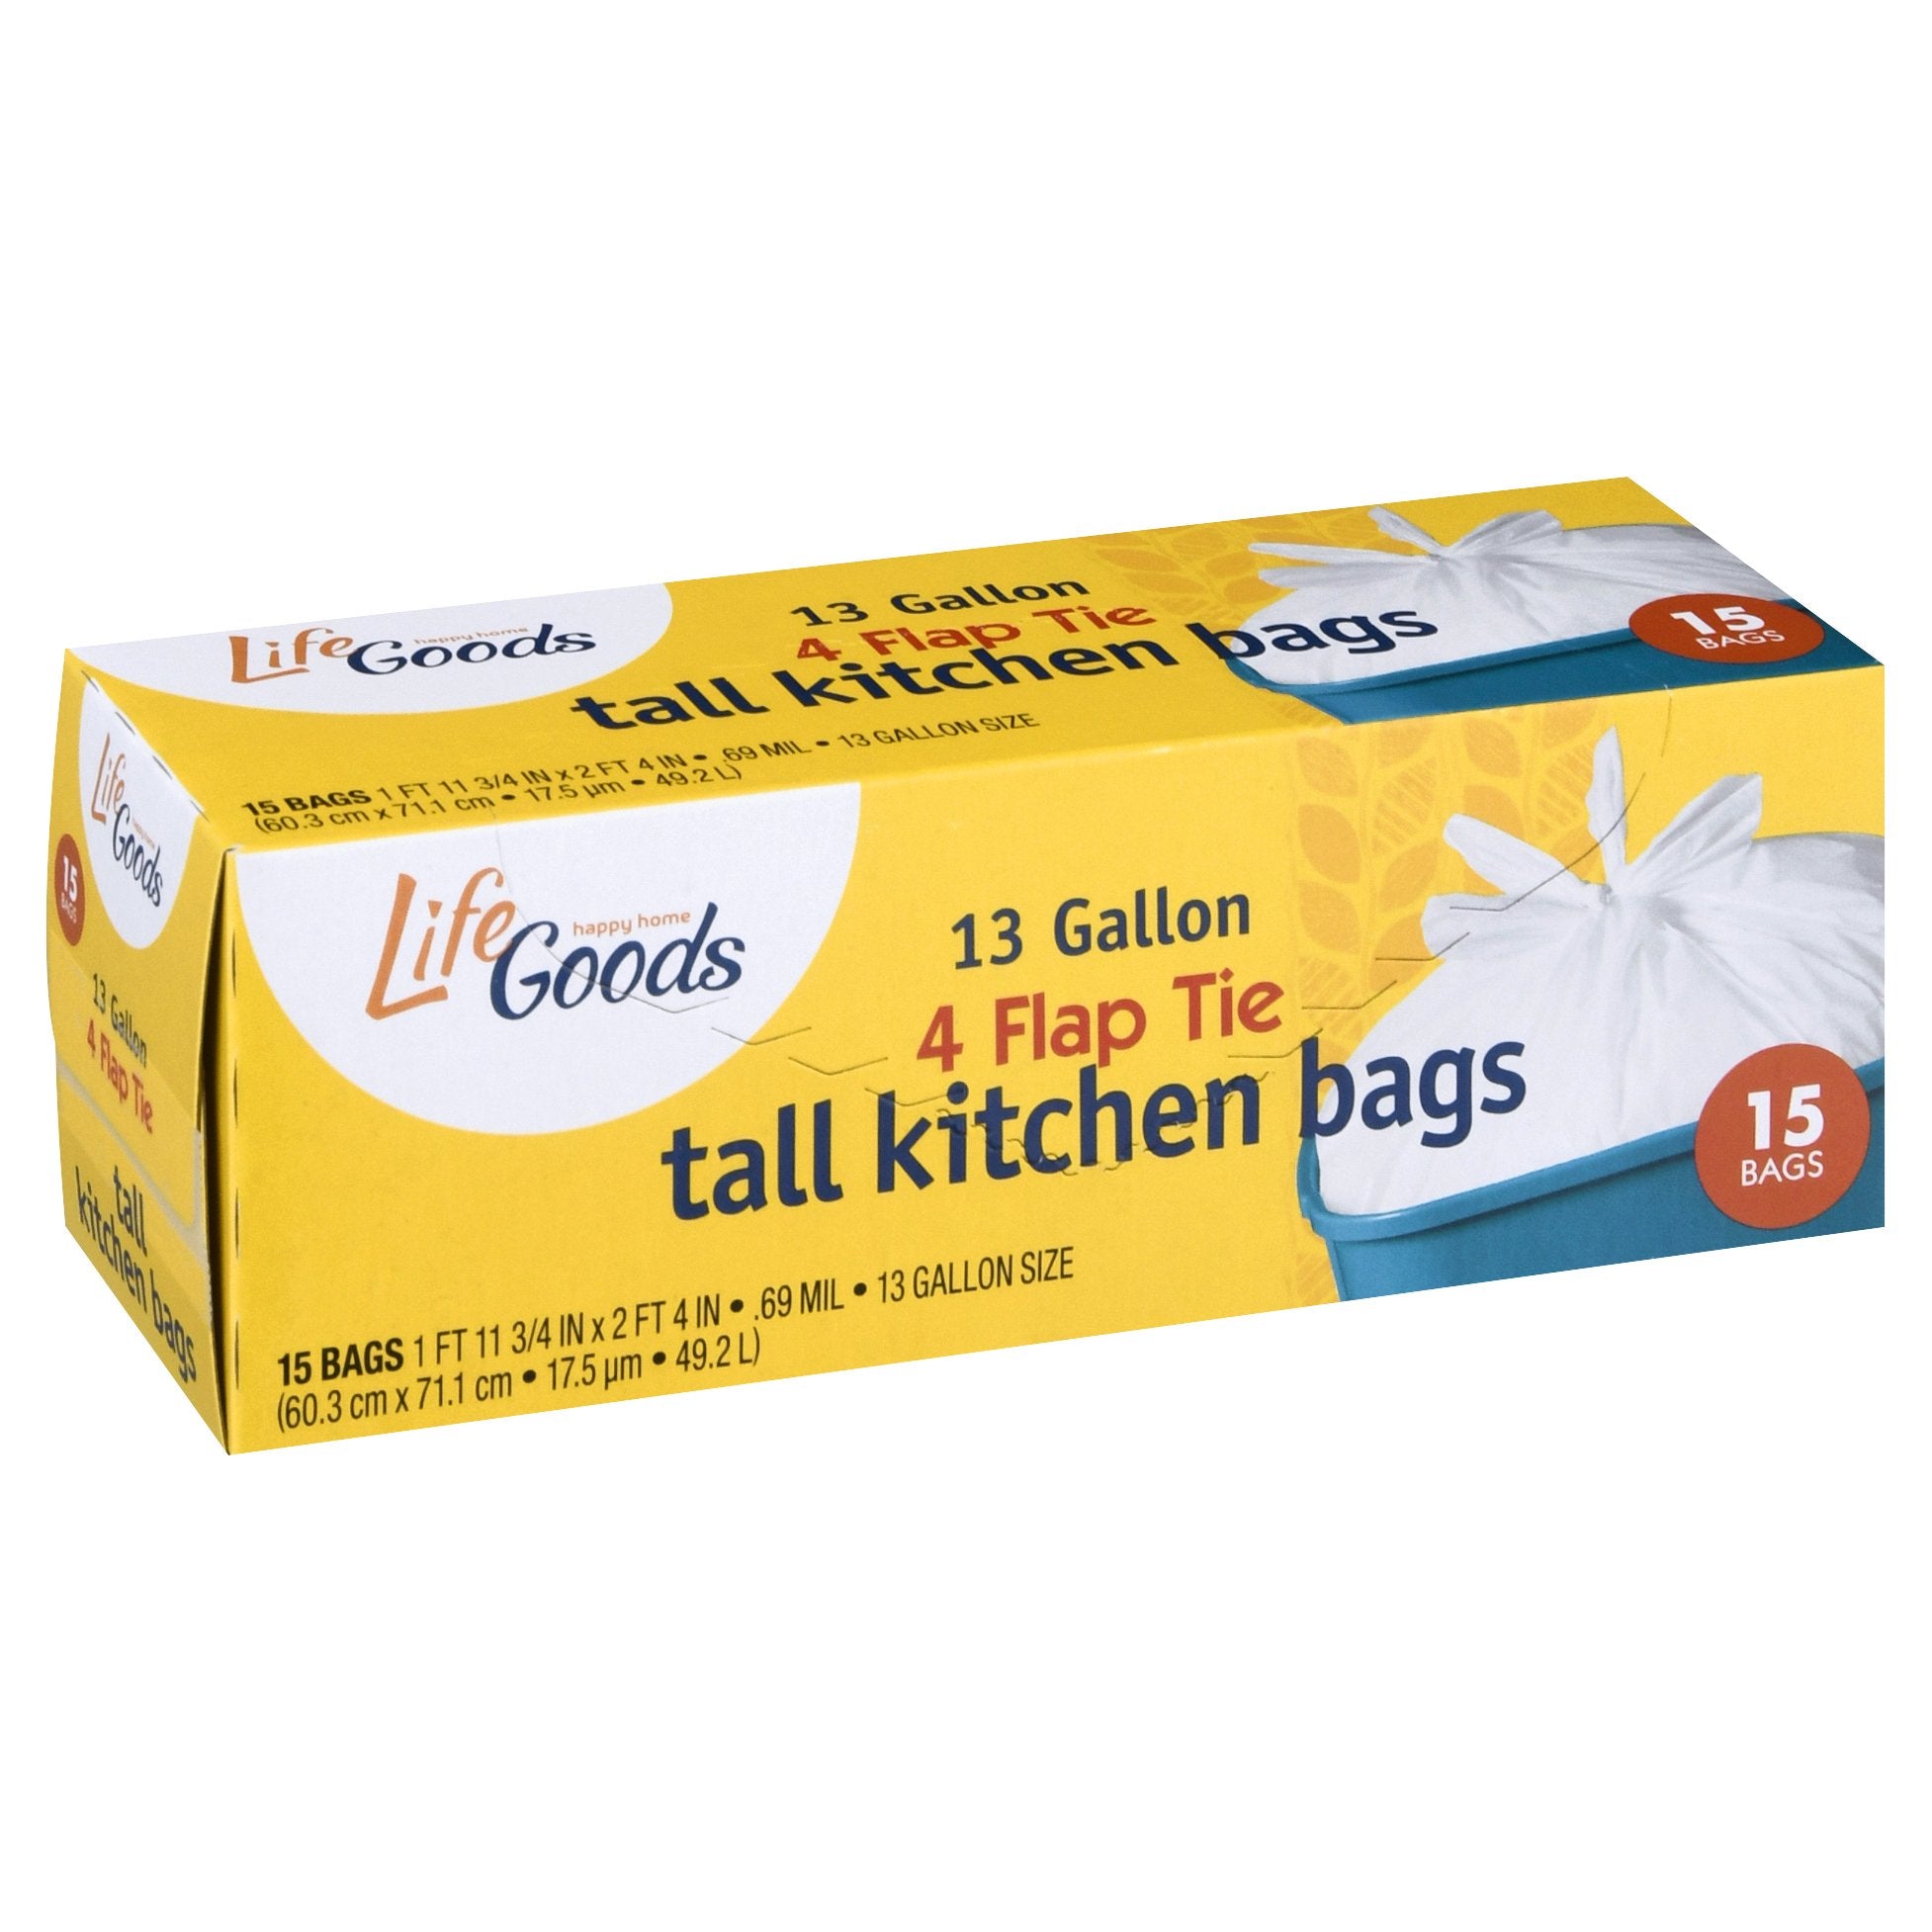 Life Goods 4 Flap Tie Tall Kitchen Bags 13 Gallon - 15 CT 12 Pack –  StockUpExpress